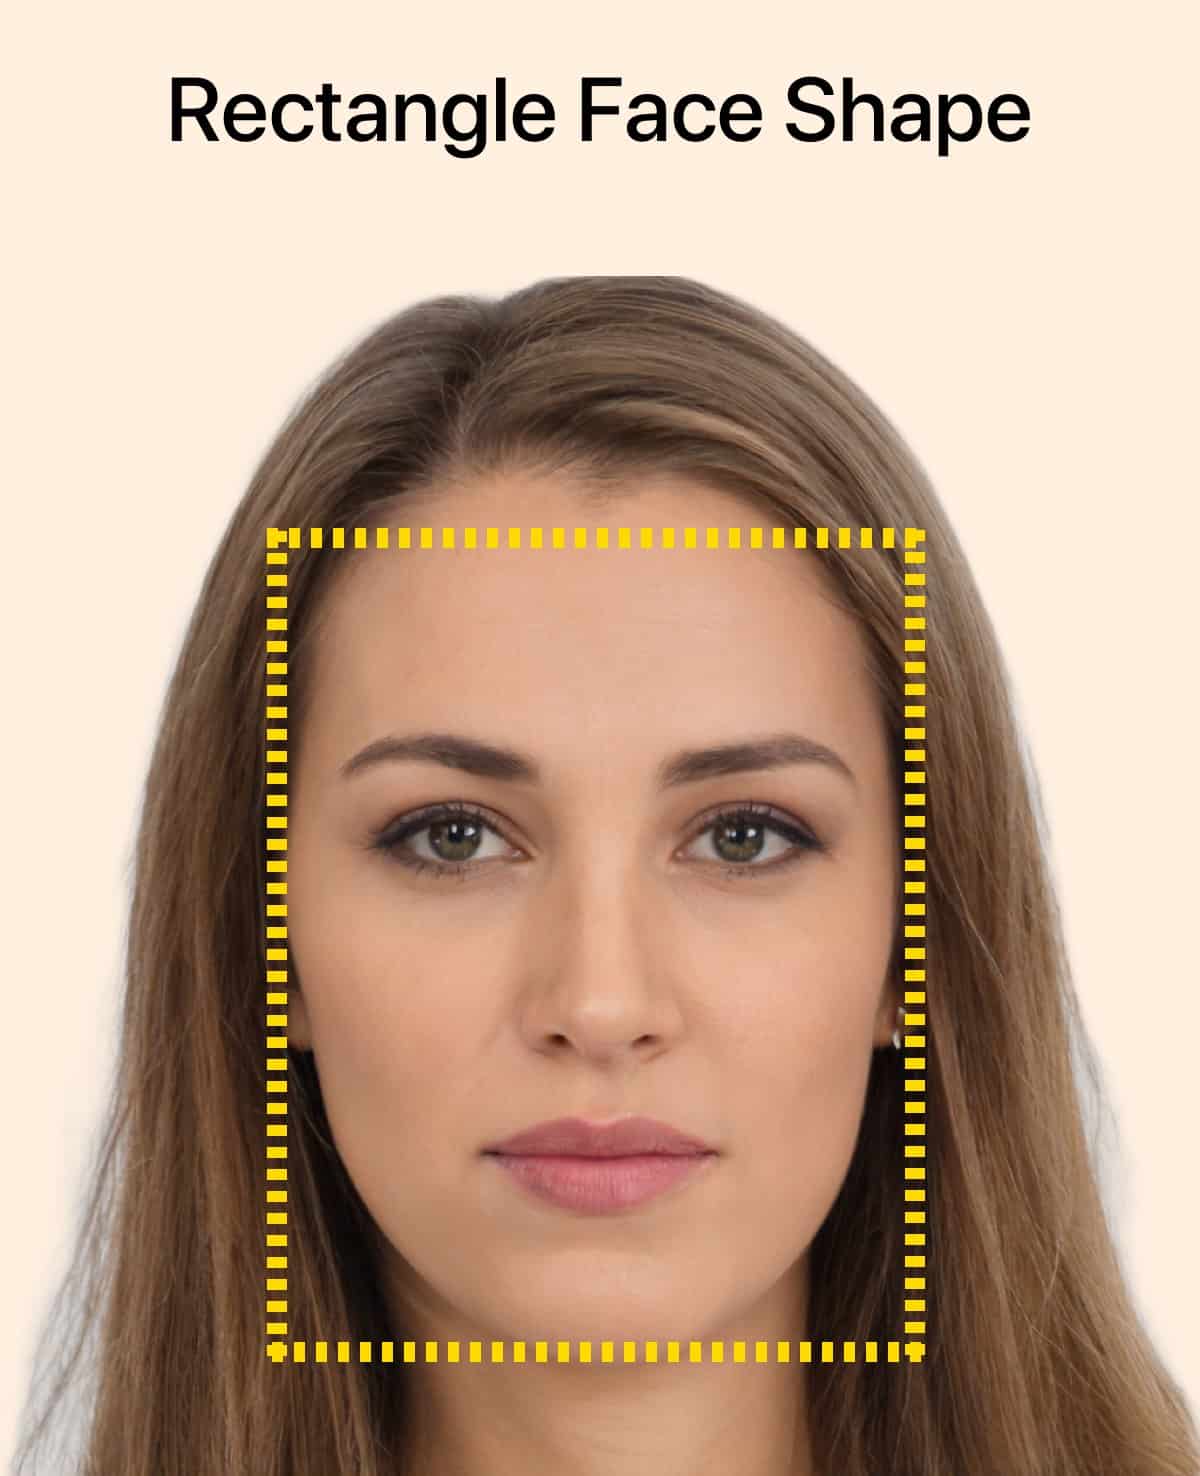 Find The Perfect Part & Haircut For Your Face Shape